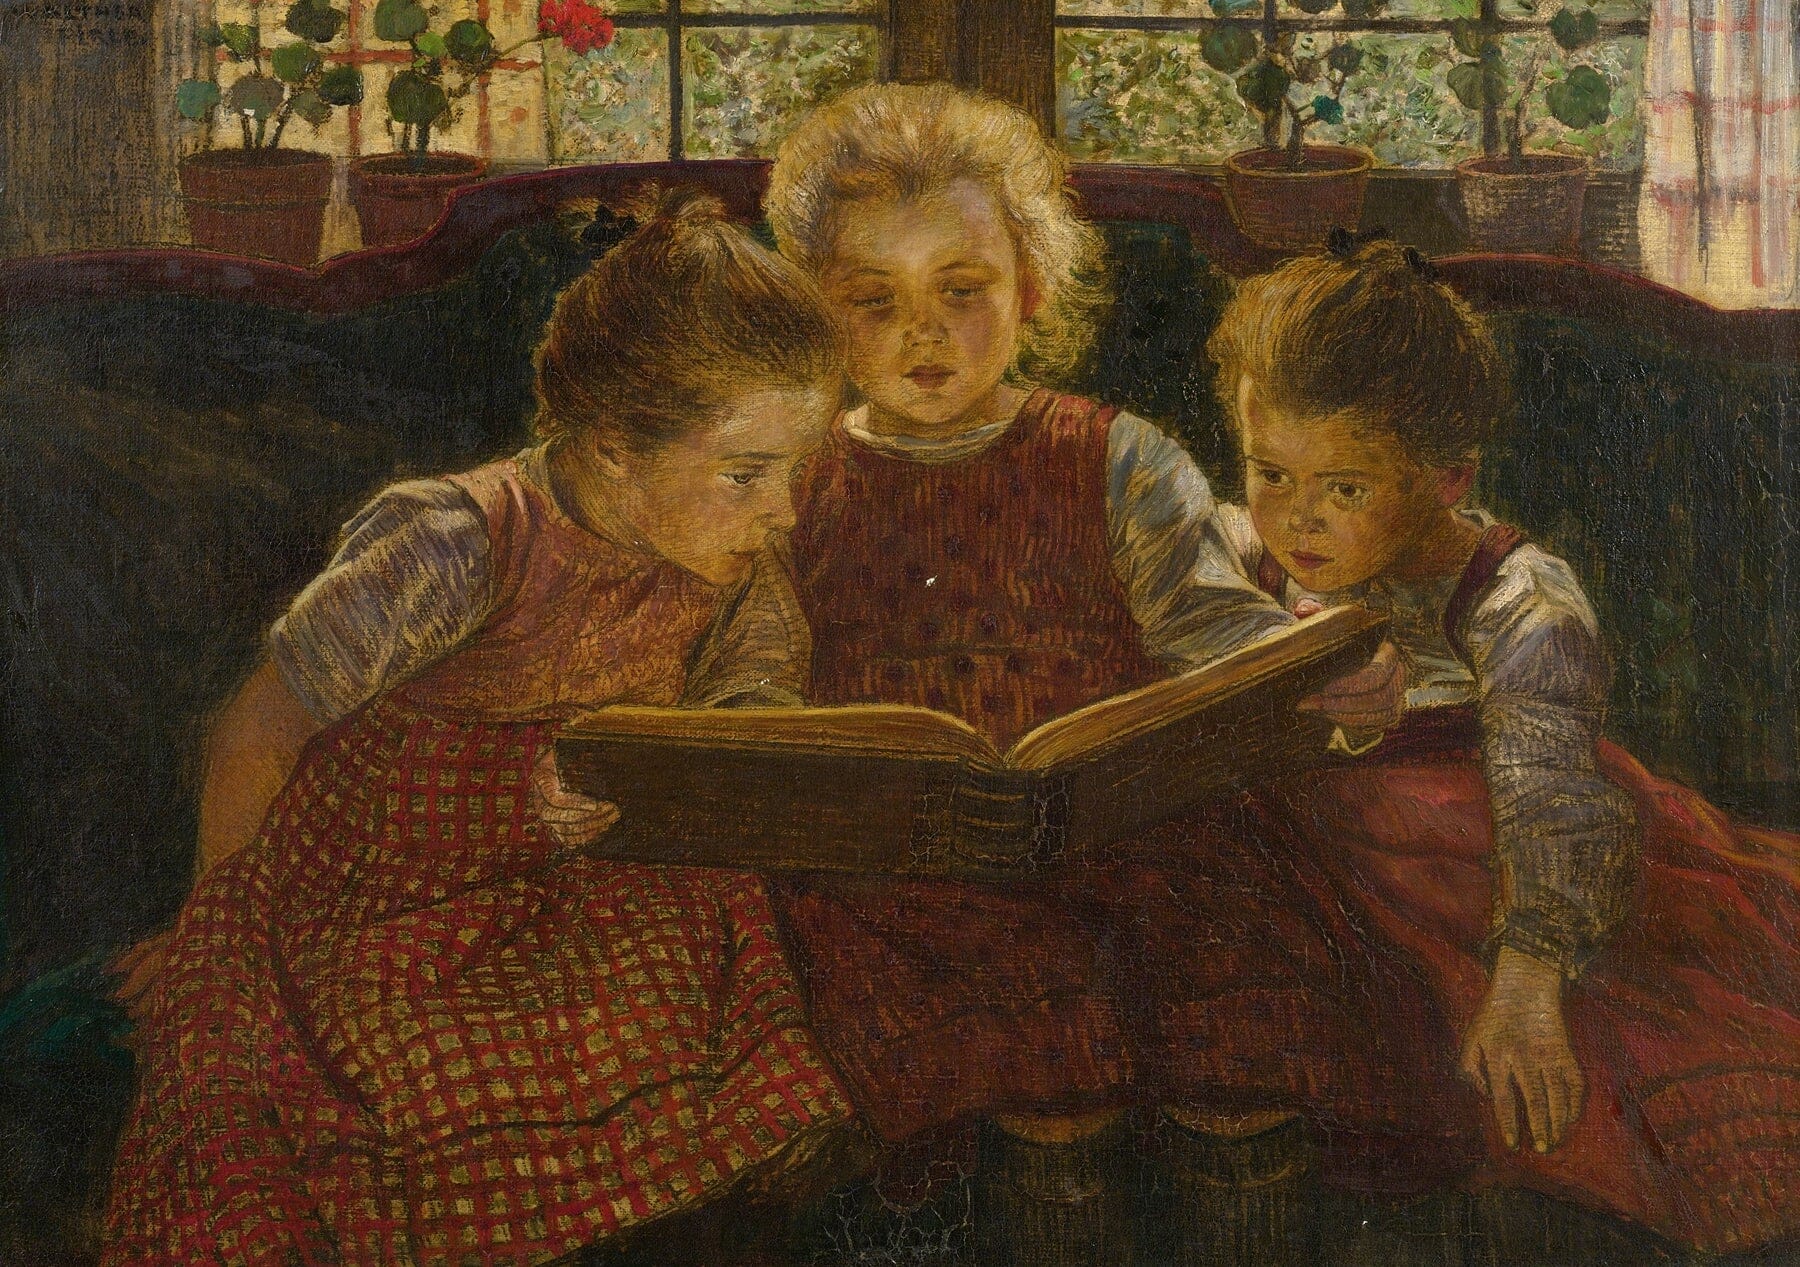 The Fairy Tale book (1900s) | Vintage fairy art prints | Walter Firle Posters, Prints, & Visual Artwork The Trumpet Shop   